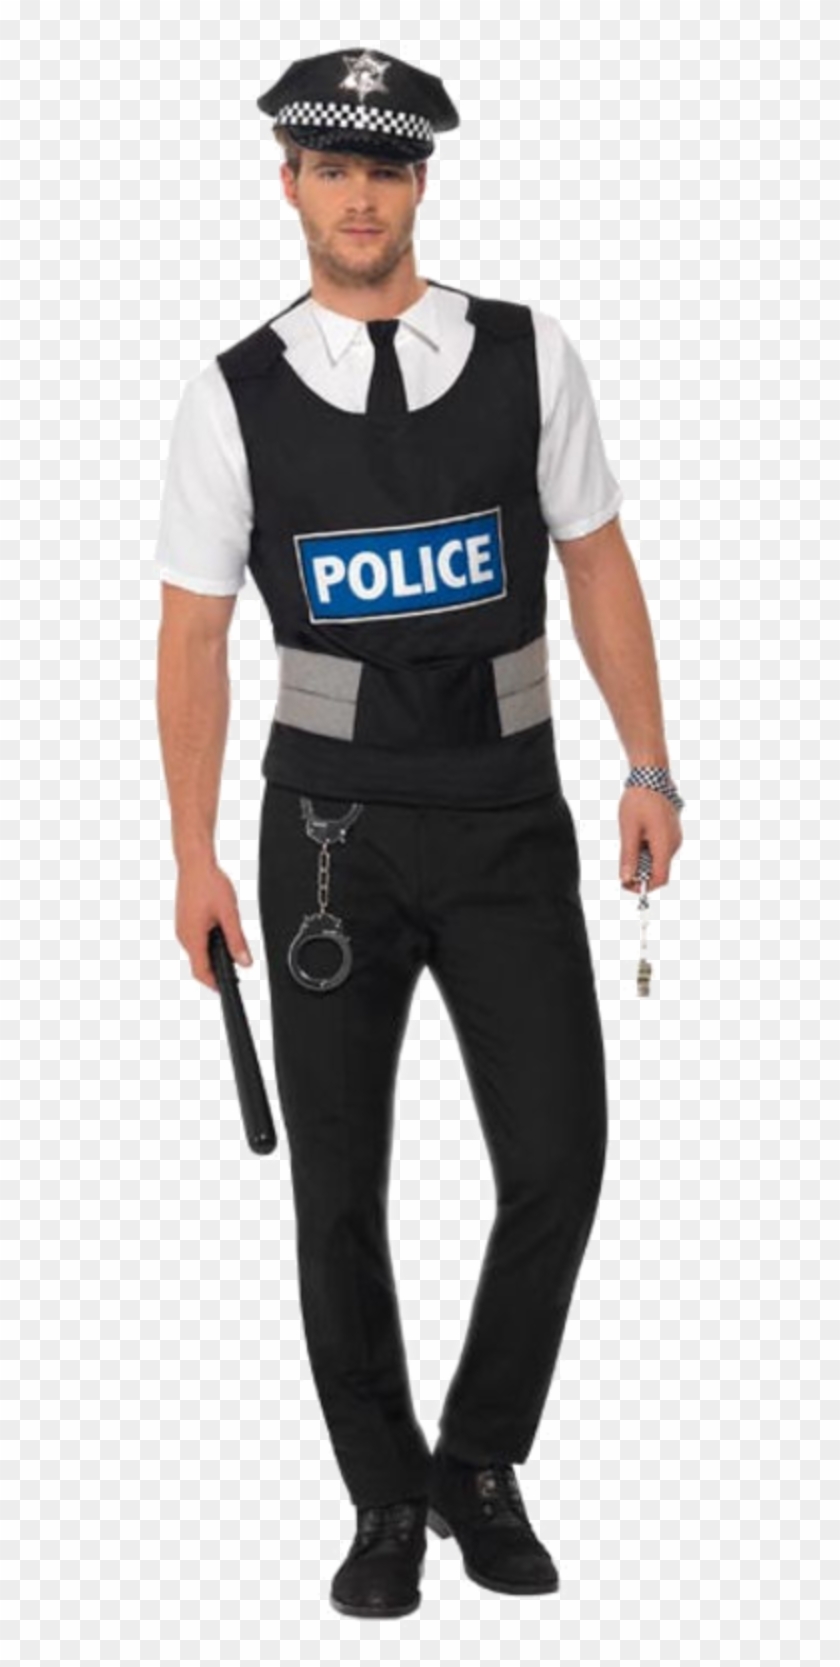 Policeman Instant Kit Costume - Cops And Robber Fancy Dress #990058